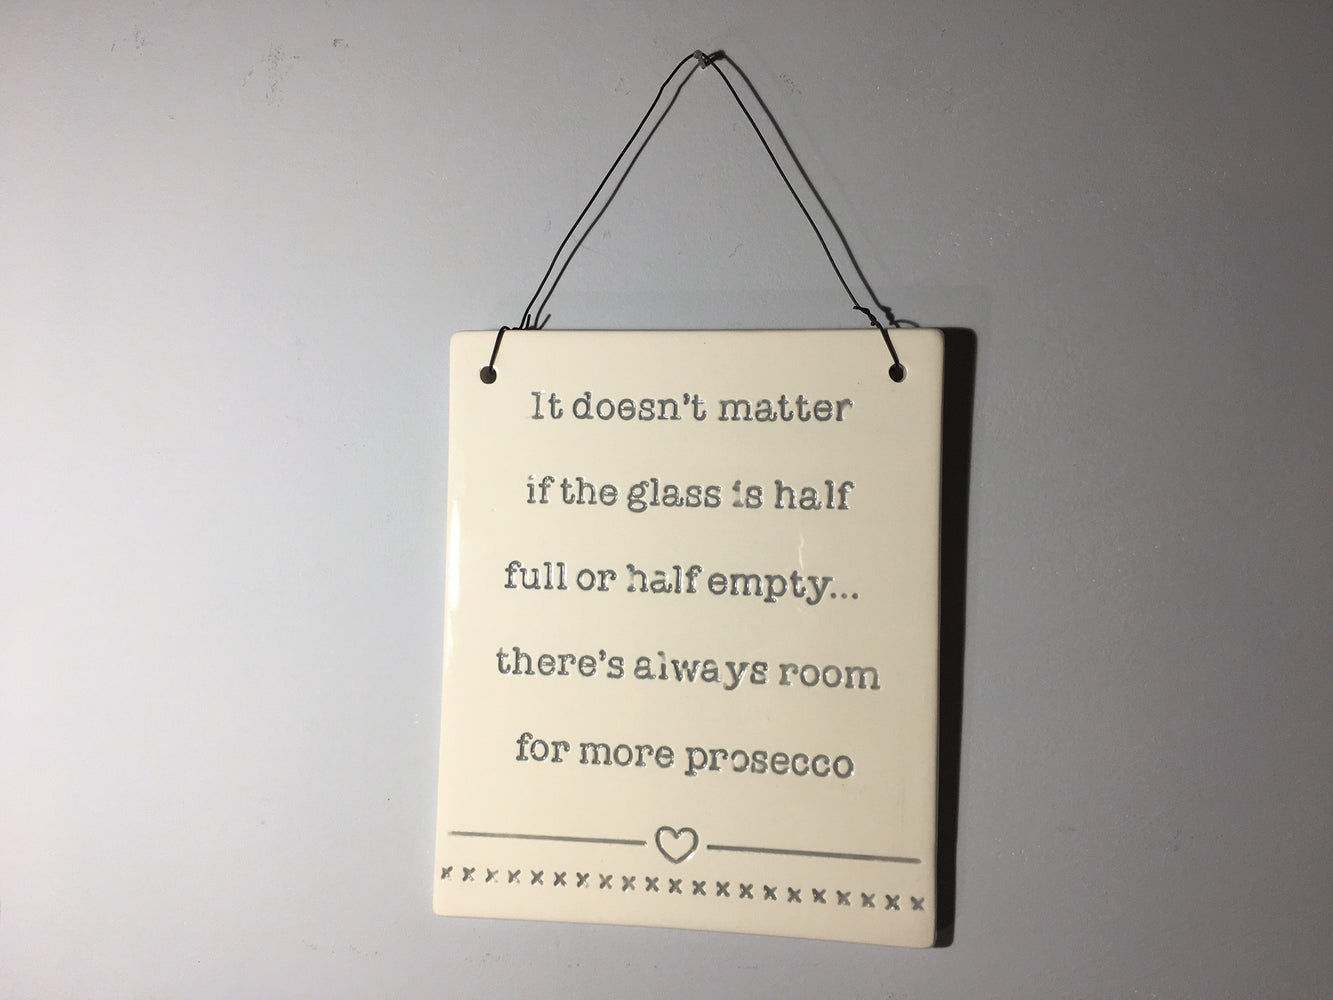 Prosecco Plaque - It doesn't matter if the glass is half full